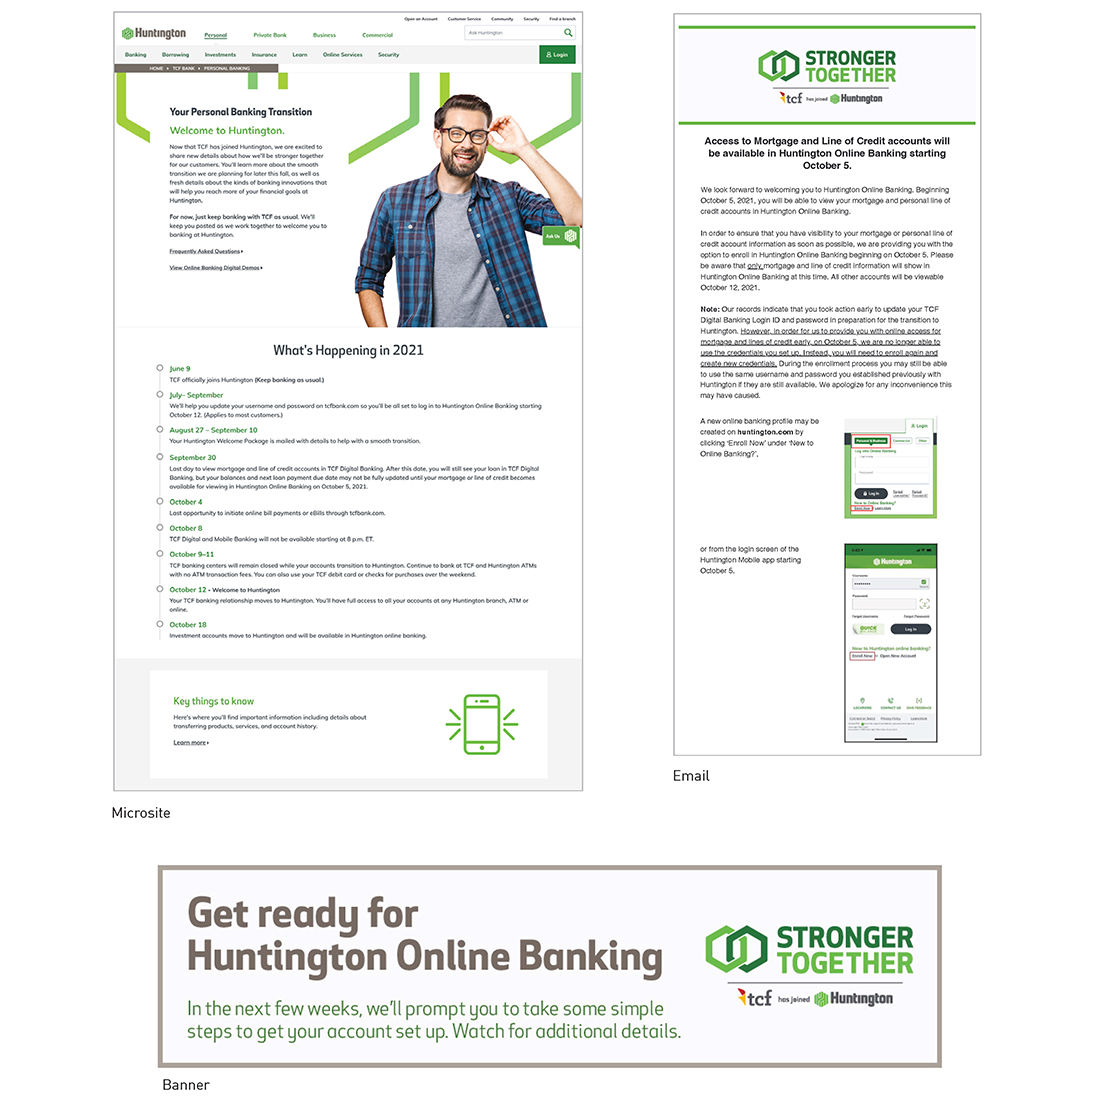 Images of microsite, email and online banking banner